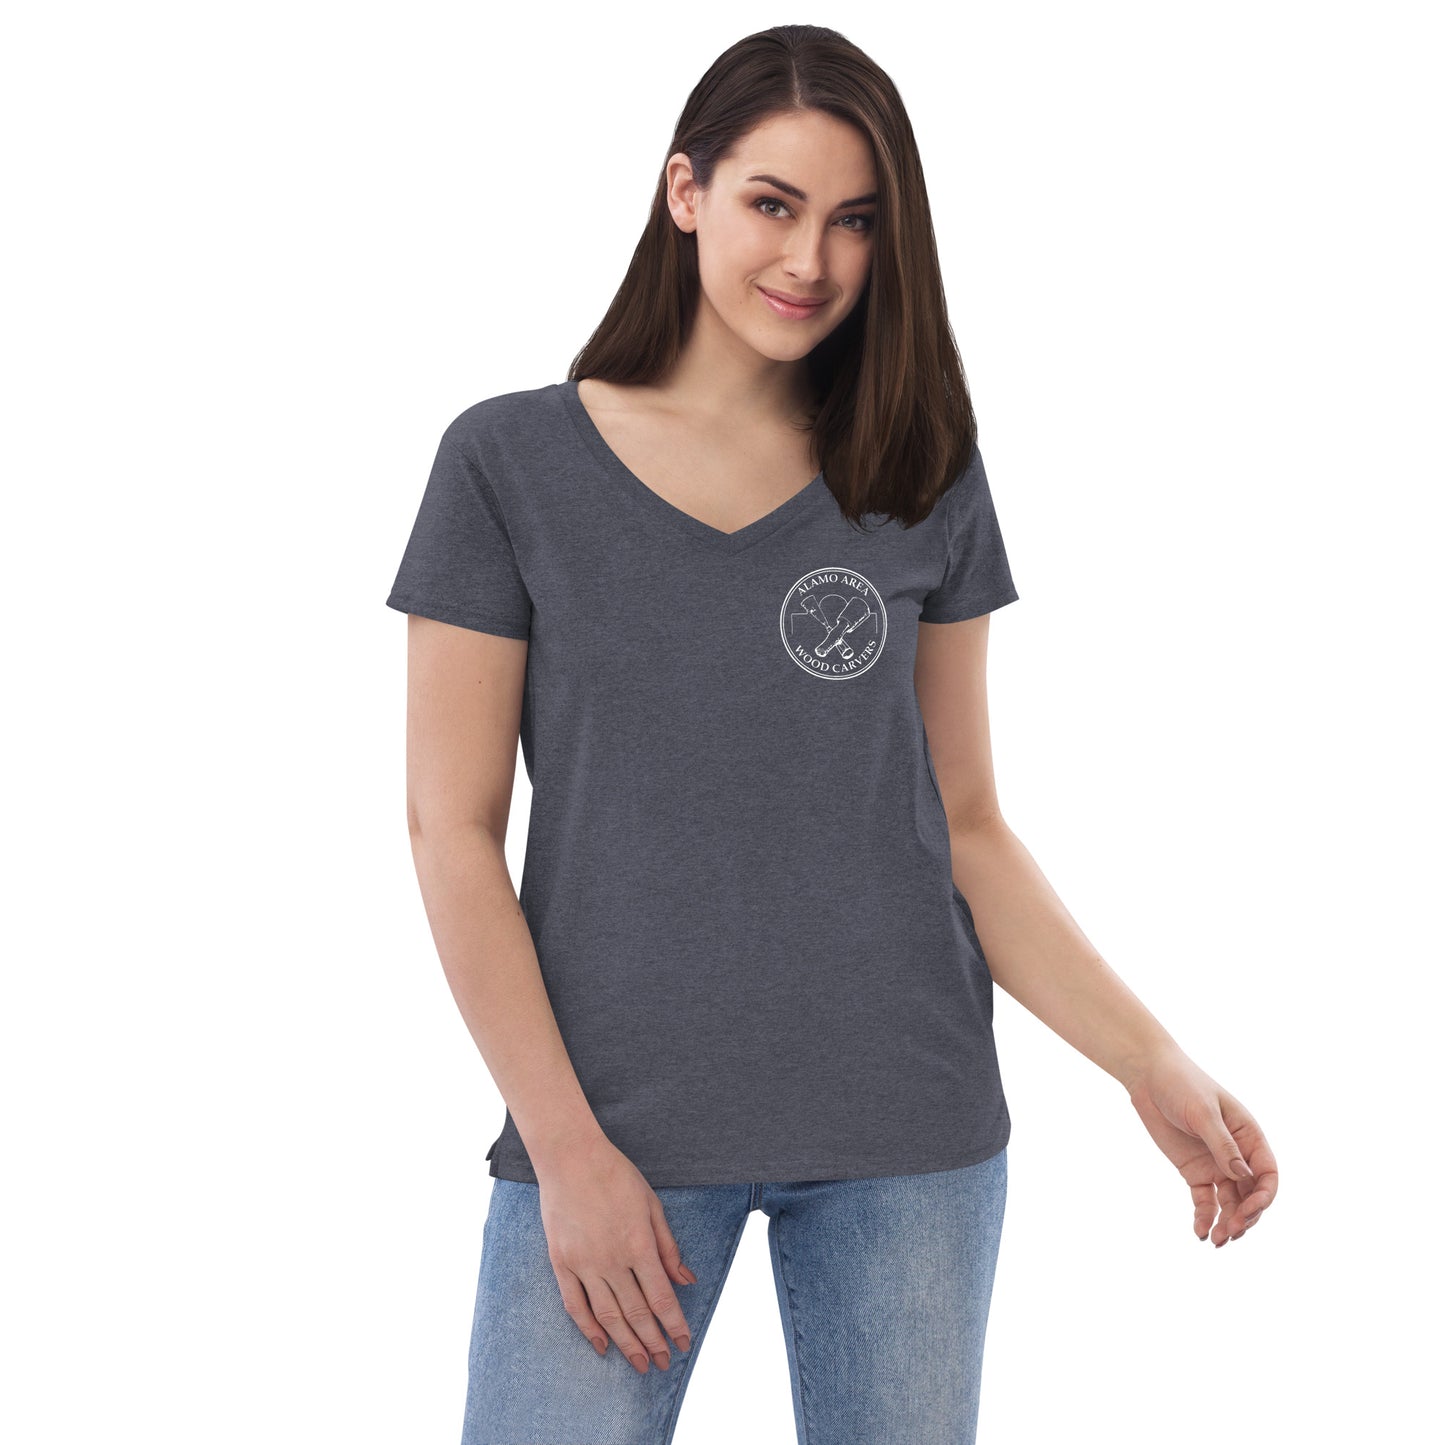 AAWC Front only logo Women’s recycled v-neck t-shirt